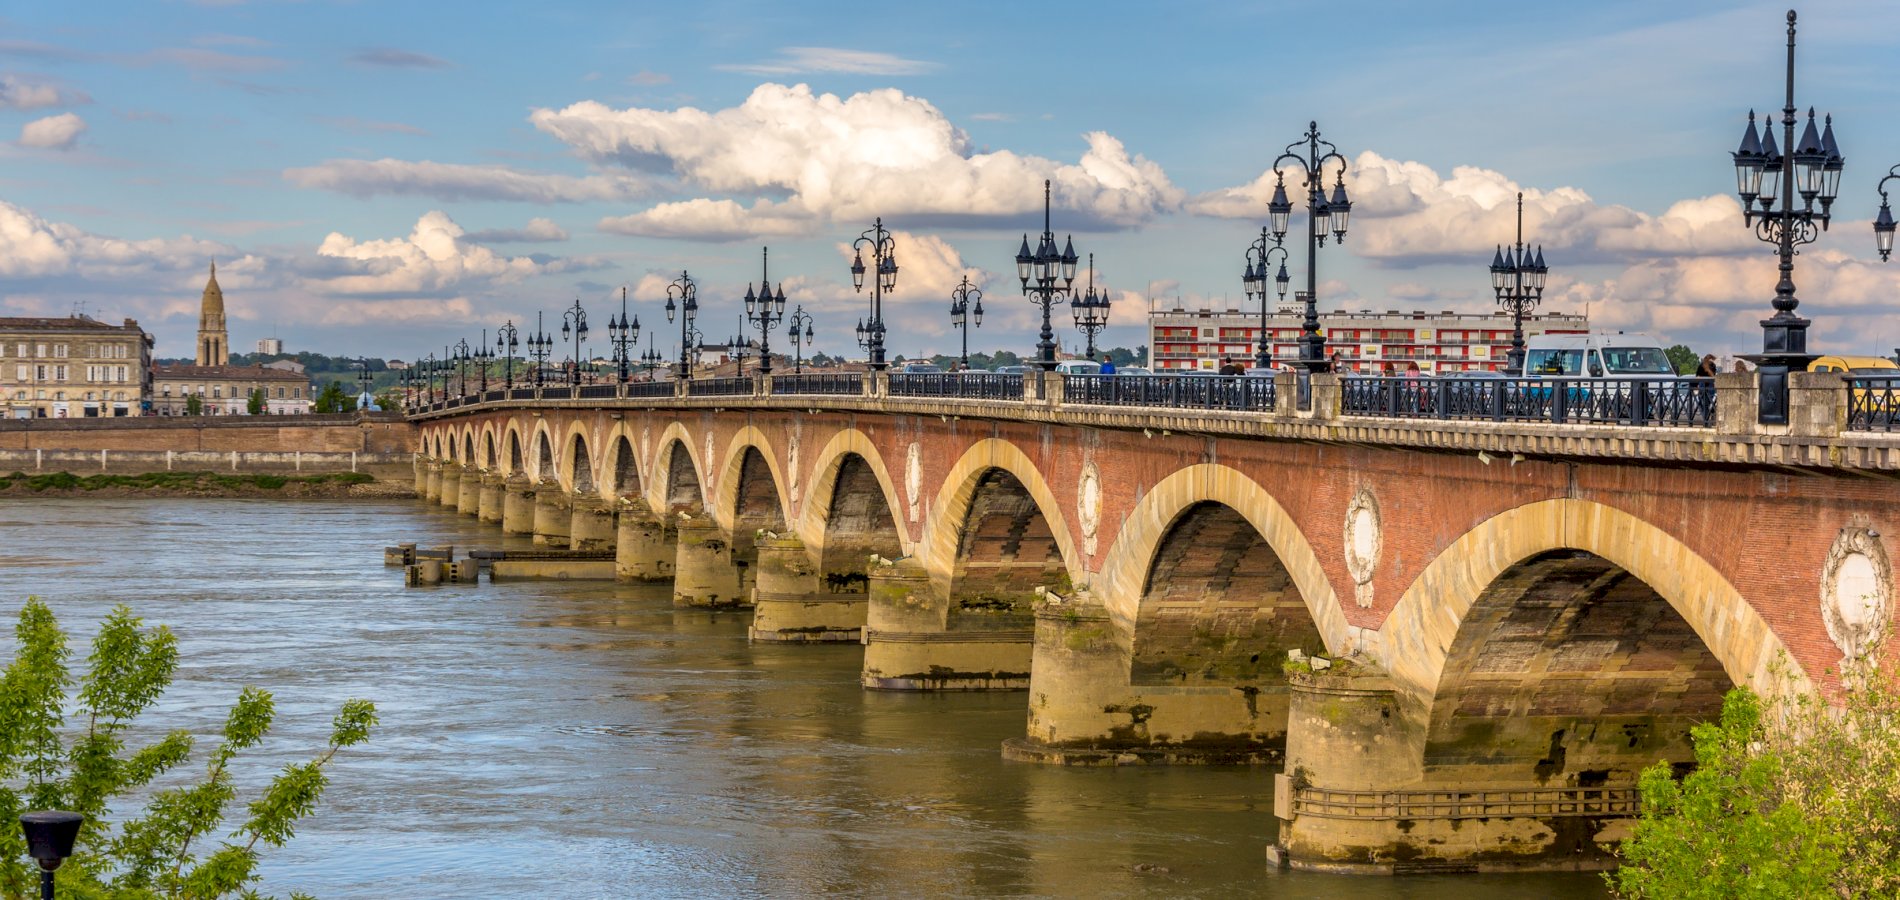 Ophorus Tours - 4 Days Small Group Bordeaux Wine Tours Travel Package - 3* Hotel